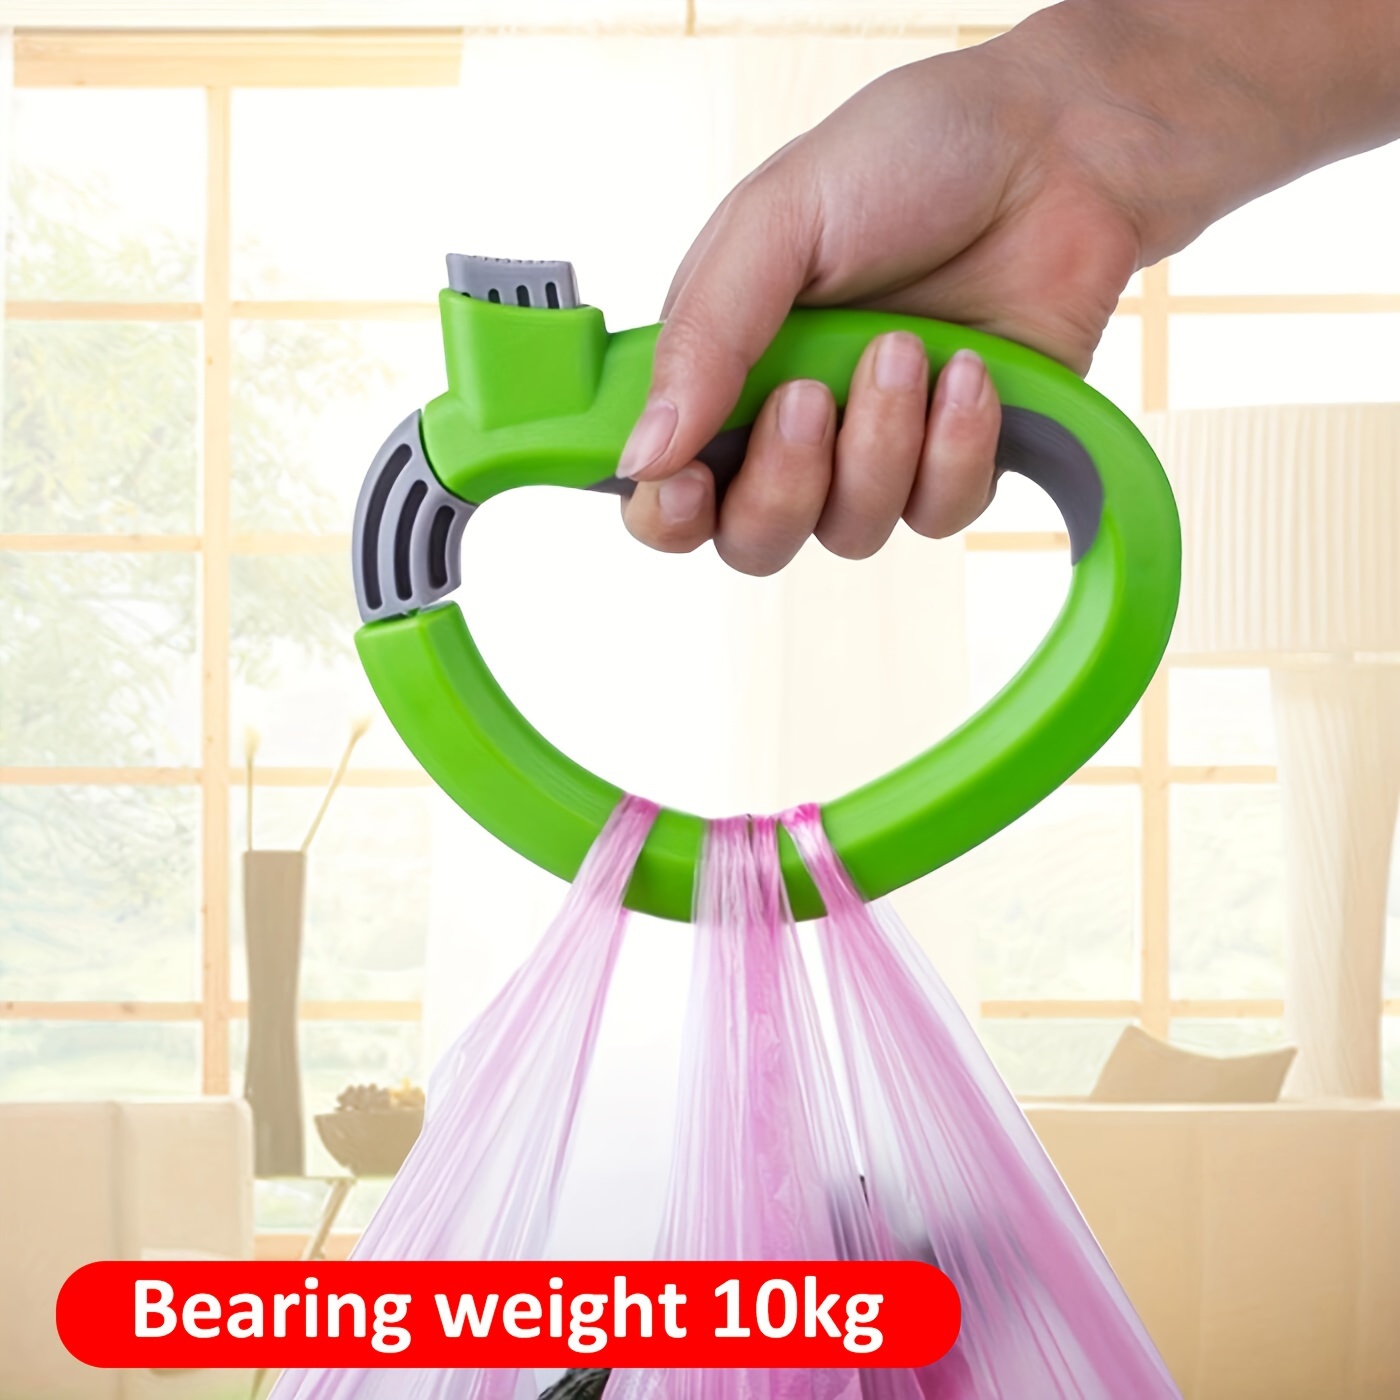 

1pc One-handed Self-locking Bag Holder For Grocery Shopping - Convenient And Secure Grip For Easy Carrying